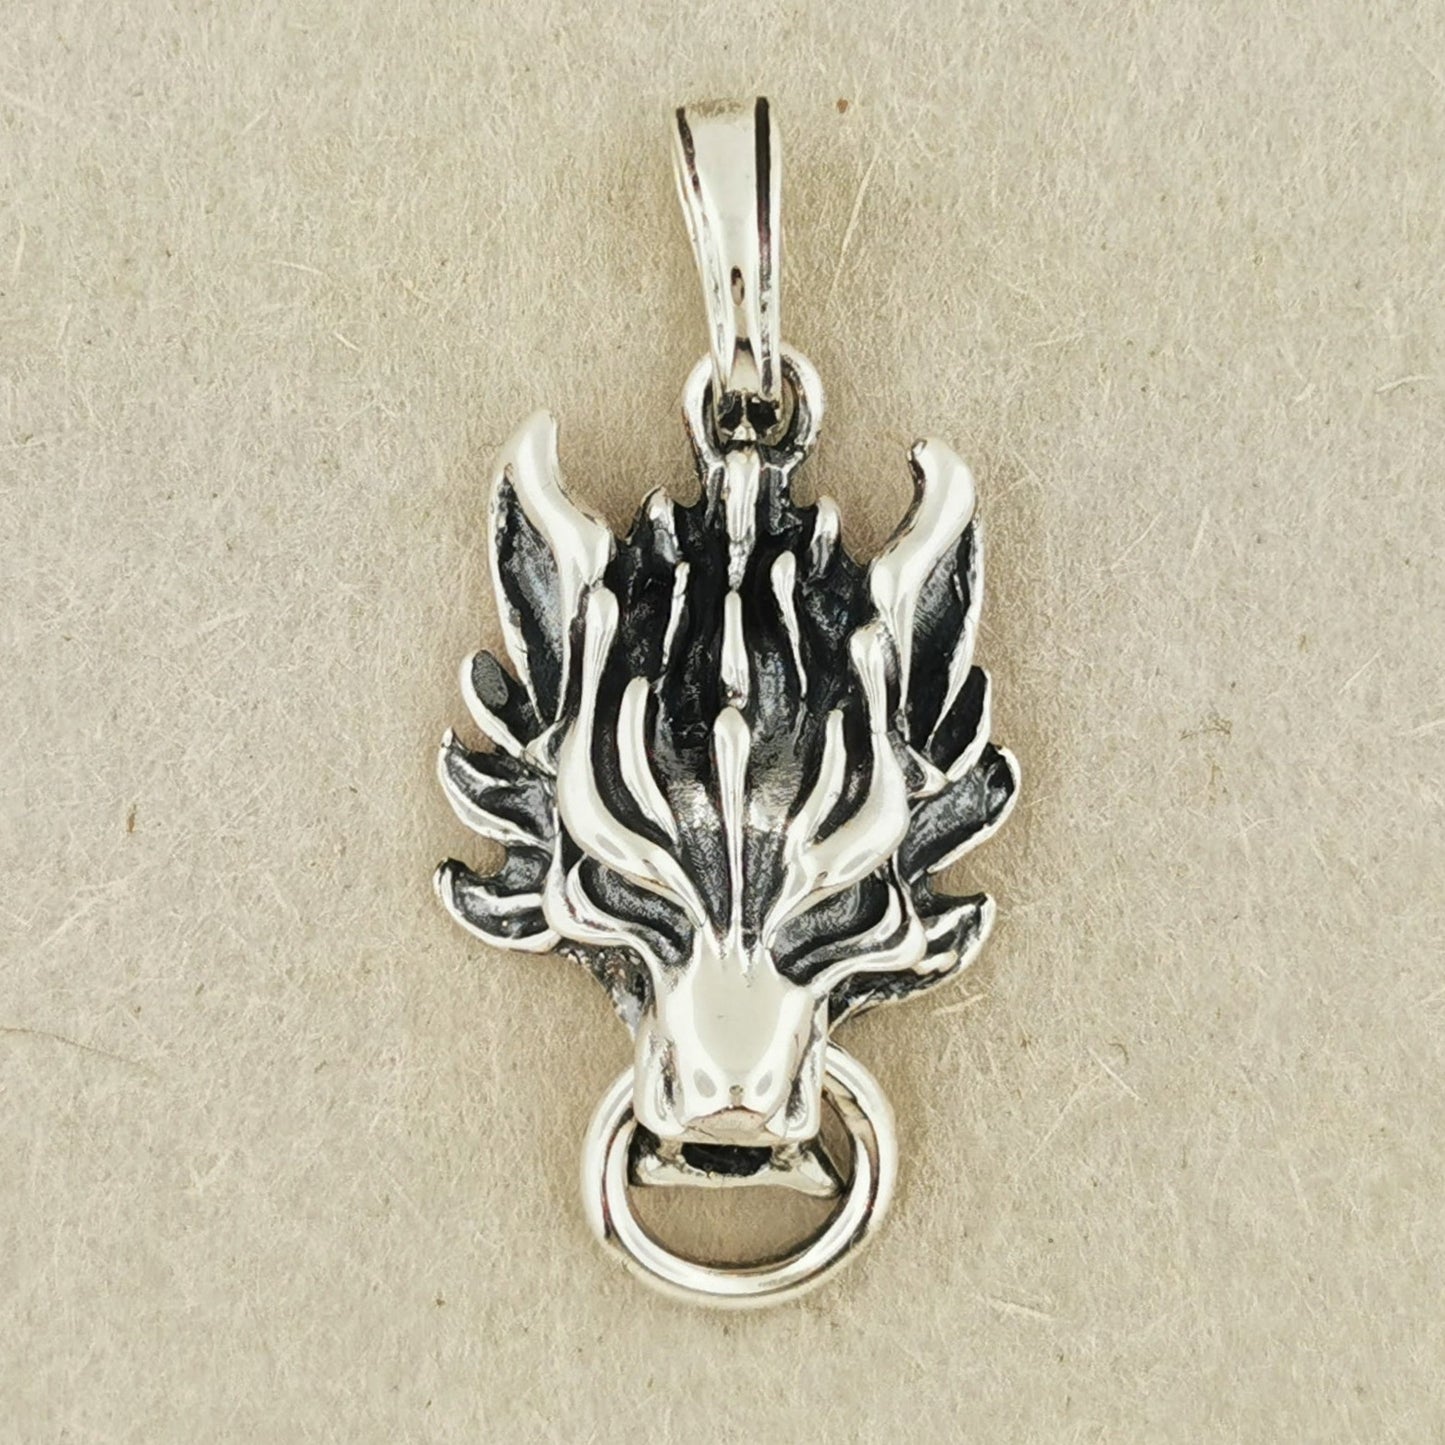 Final Fantasy 7 Wolf Pendant in Sterling Silver or Antique Bronze, FF7 Fenrir Wolf Pendant, FF7 Cloud Strife Wolf Pendant, Final Fantasy 7 Advent Children Wolf Pendant, Final Fantasy vii Cloud, Final Fantasy jewelry, Final Fantasy Pendant